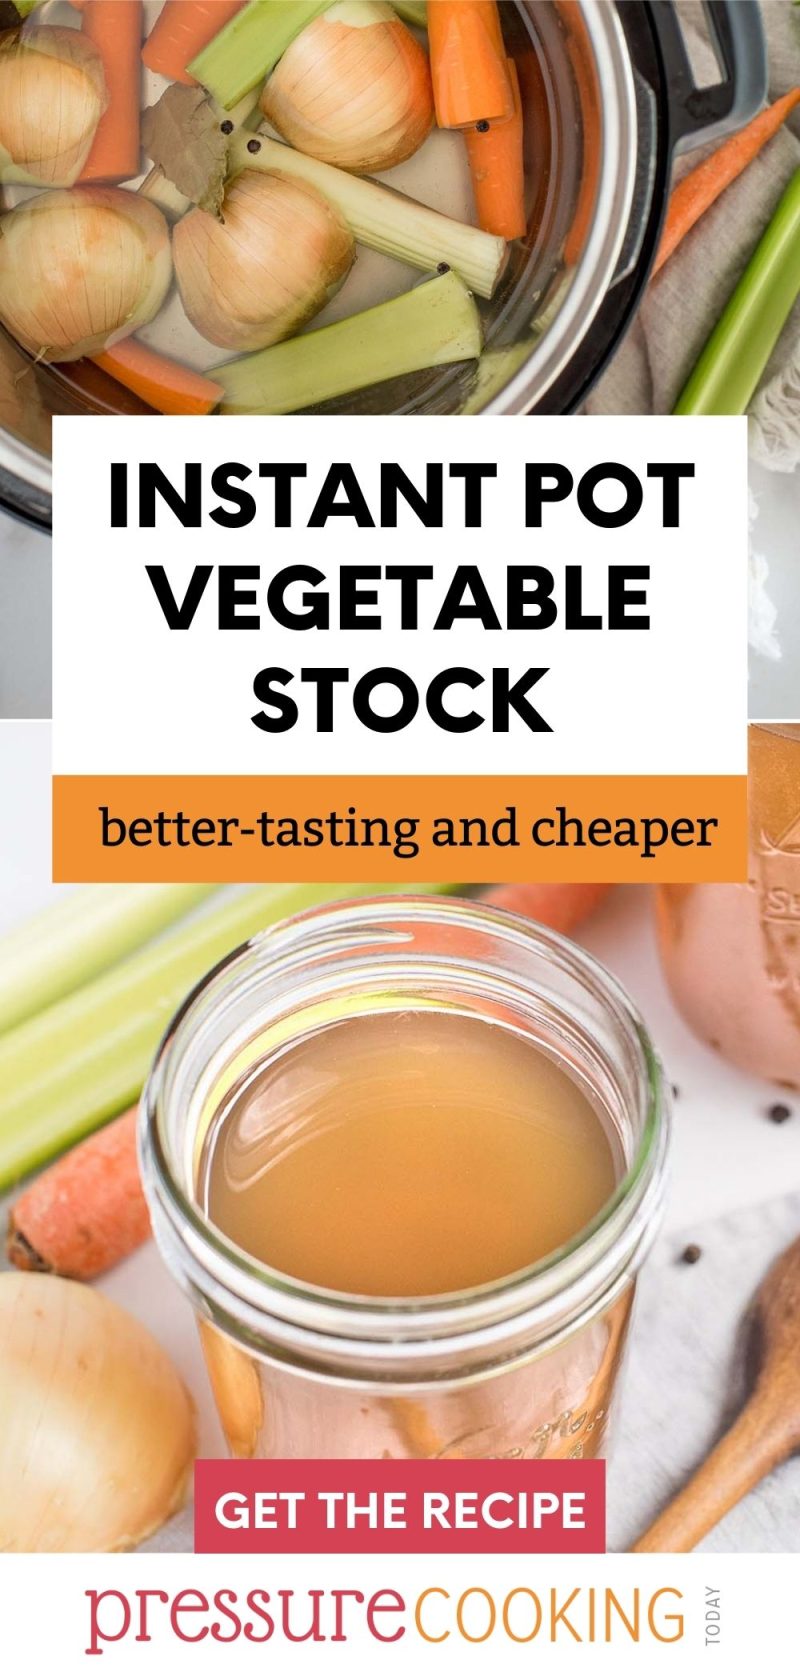 Pinterest button with text that reads "Instant Pot vegetable stock: Better-tasting and cheaper" overlaid on two photos: the first of the ingredients inside the Instant Pot and the second a tight close up of the broth